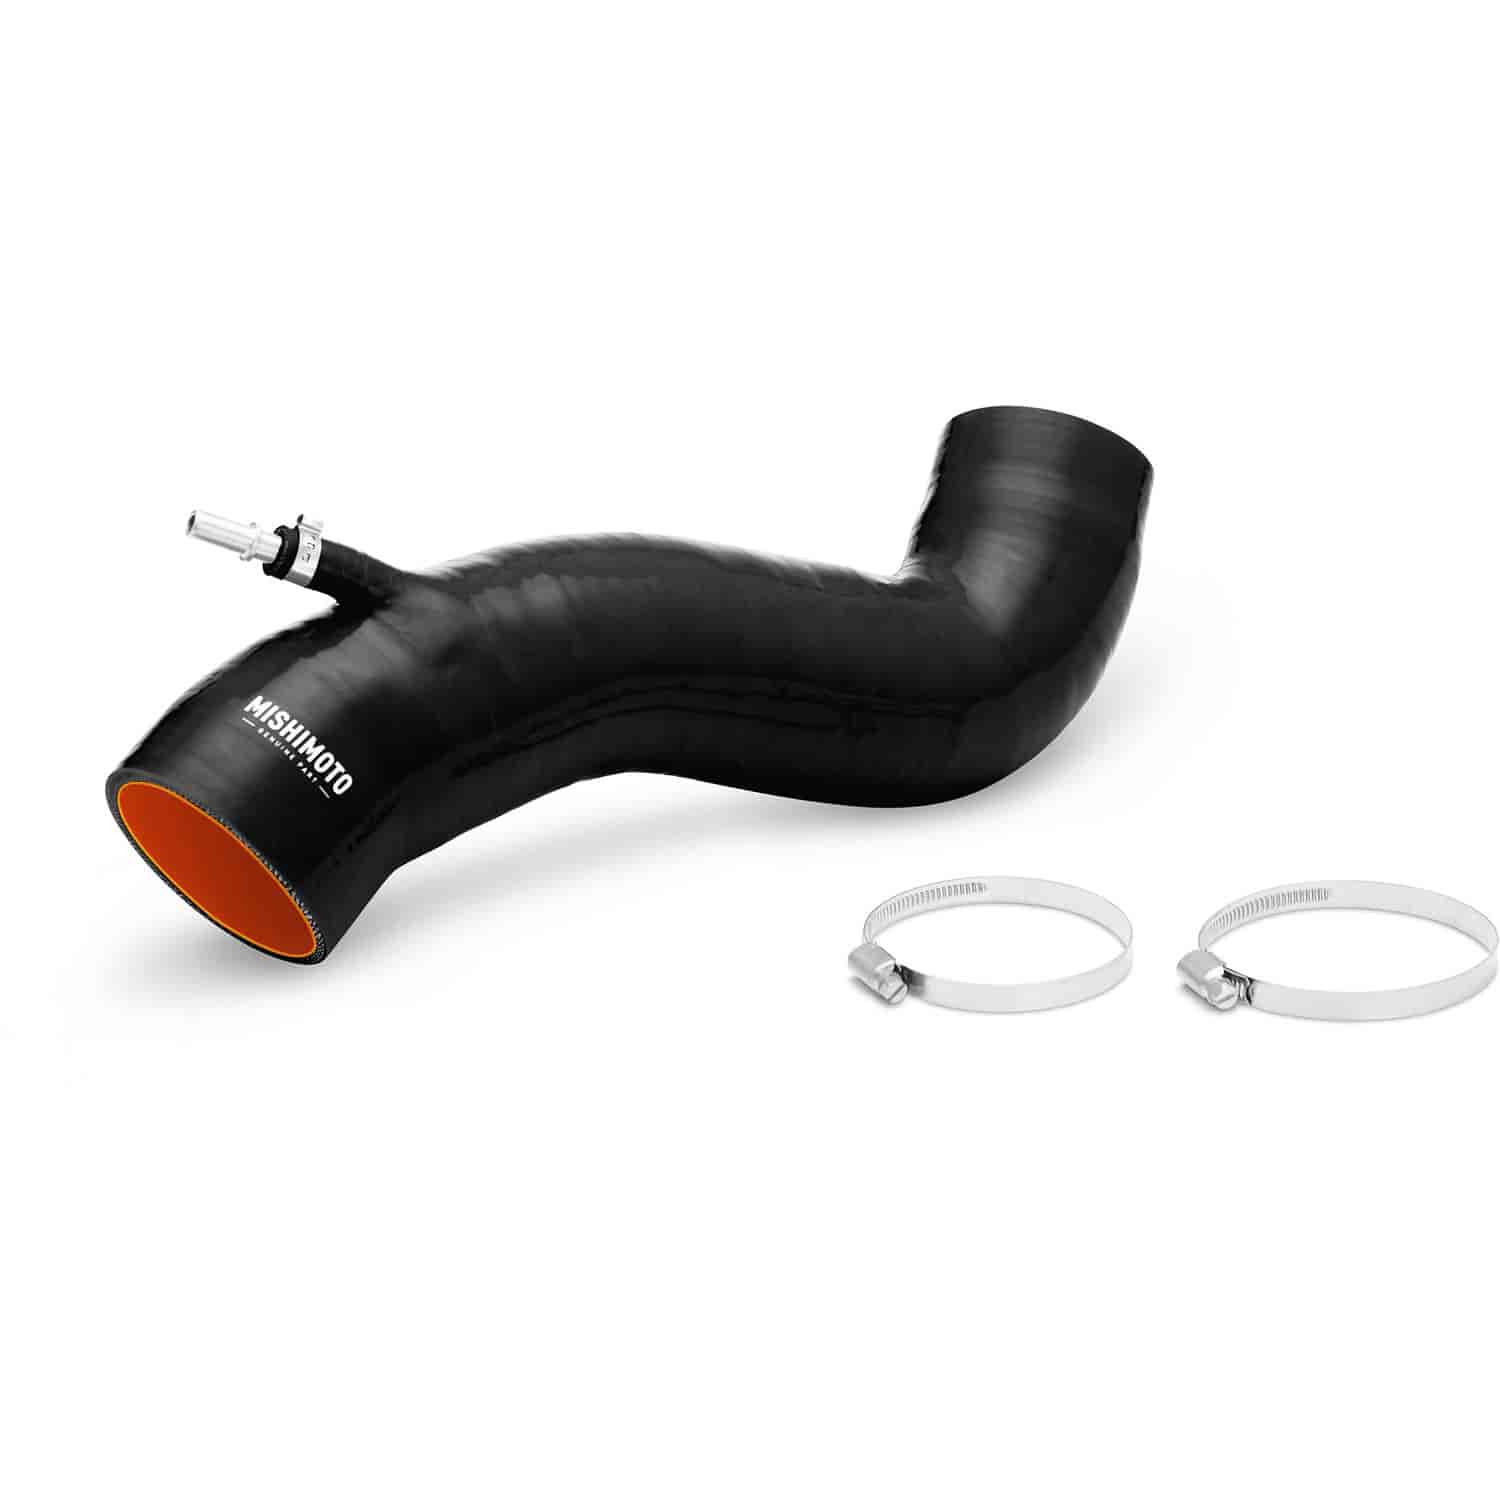 Ford Fiesta ST Silicone Induction Hose - MFG Part No. MMHOSE-FIST-14IHBK